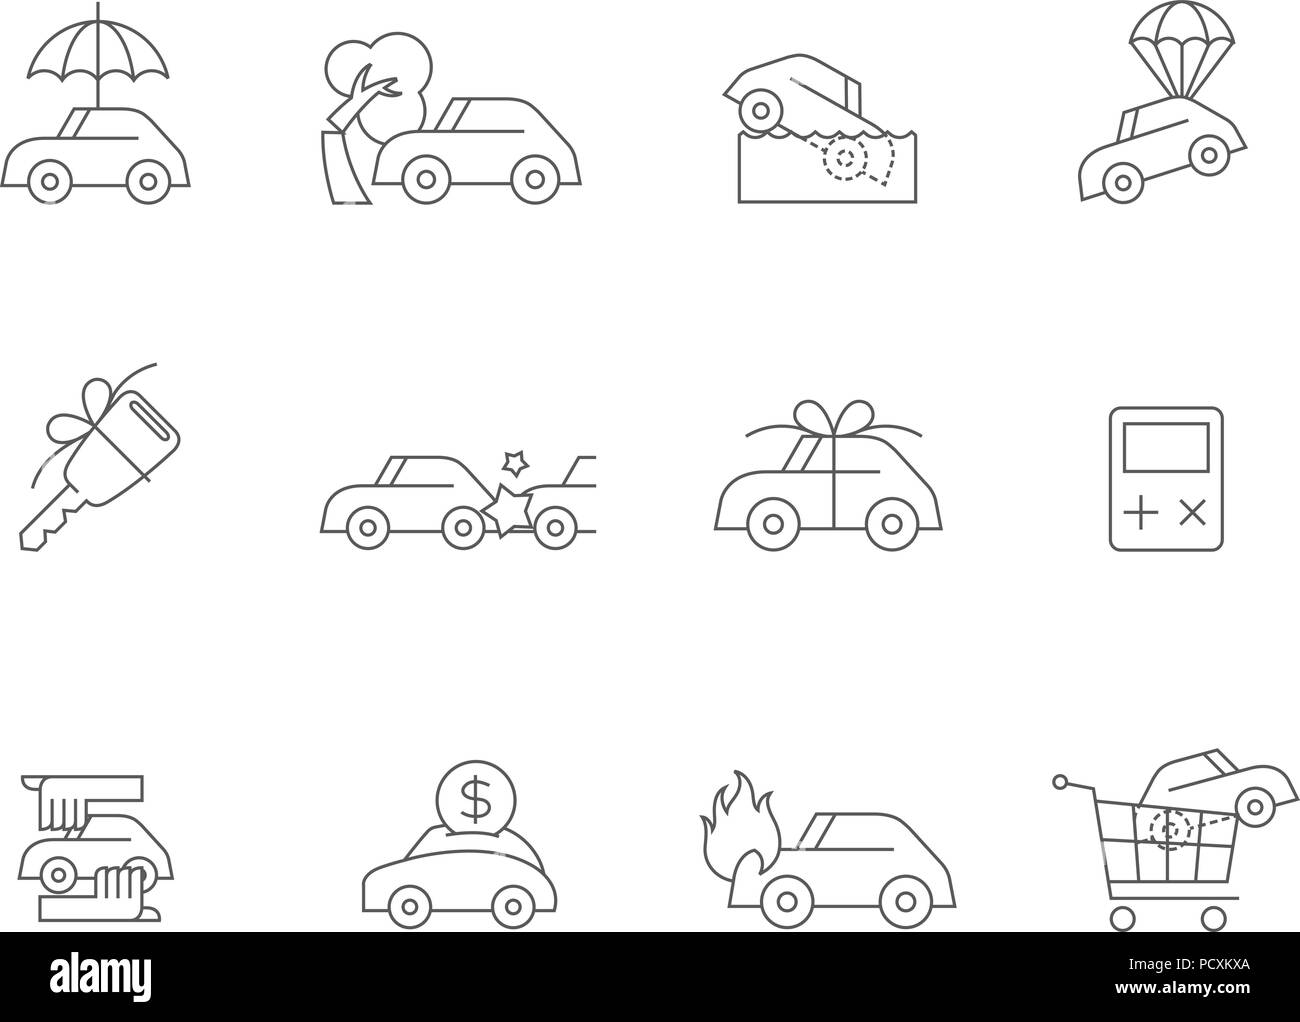 Outline Icons - Auto Insurance Stock Vector